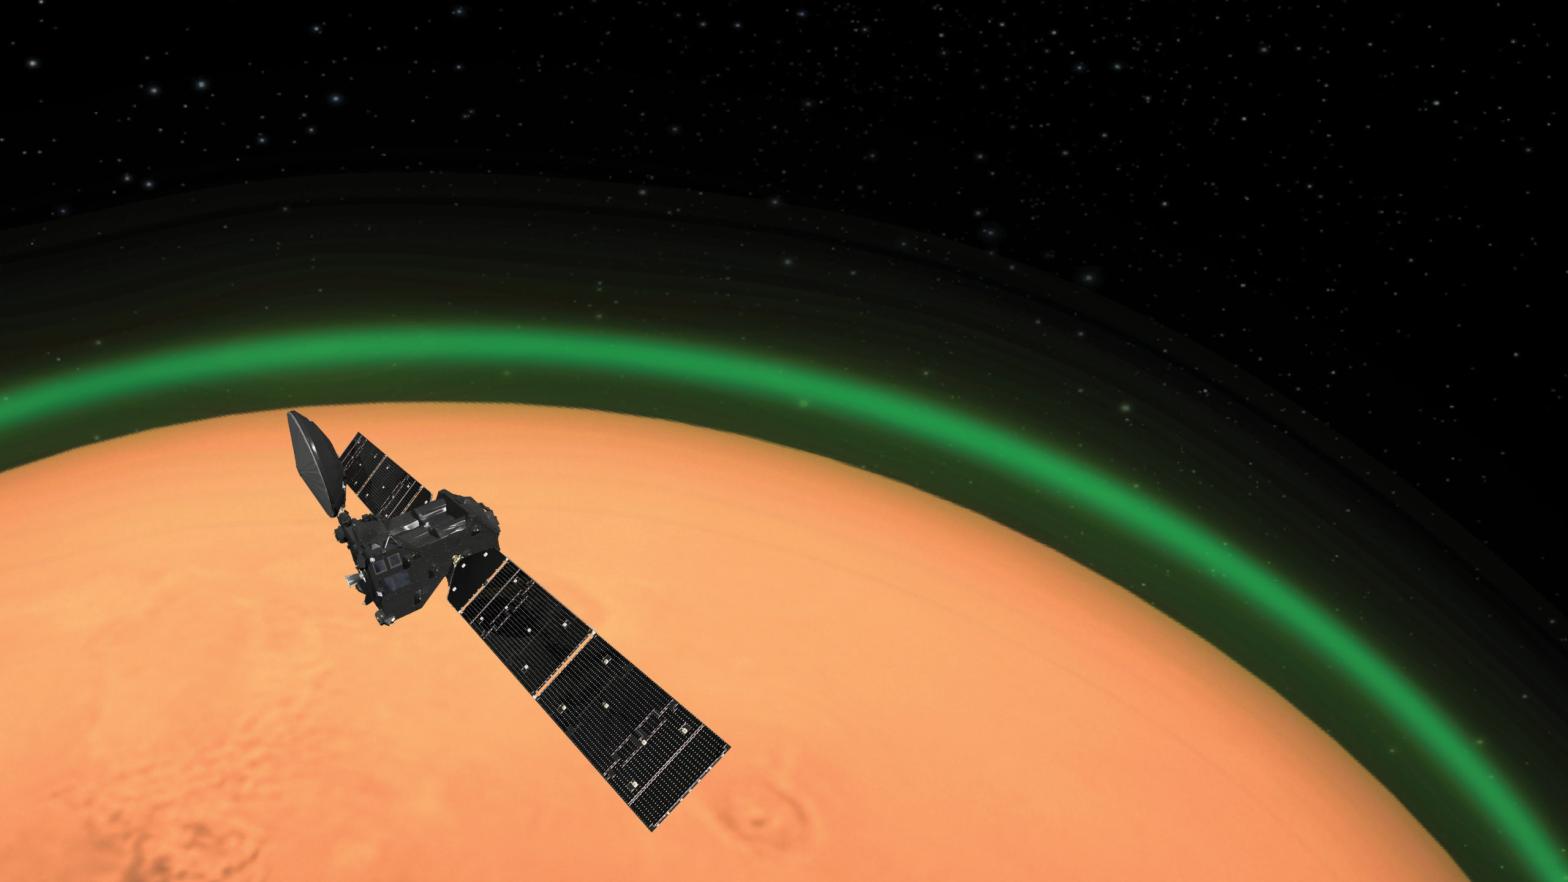 Artist's impression of ESA's ExoMars Trace Gas Orbiter detecting the green glow of oxygen in the martian atmosphere. (Image: ESA)